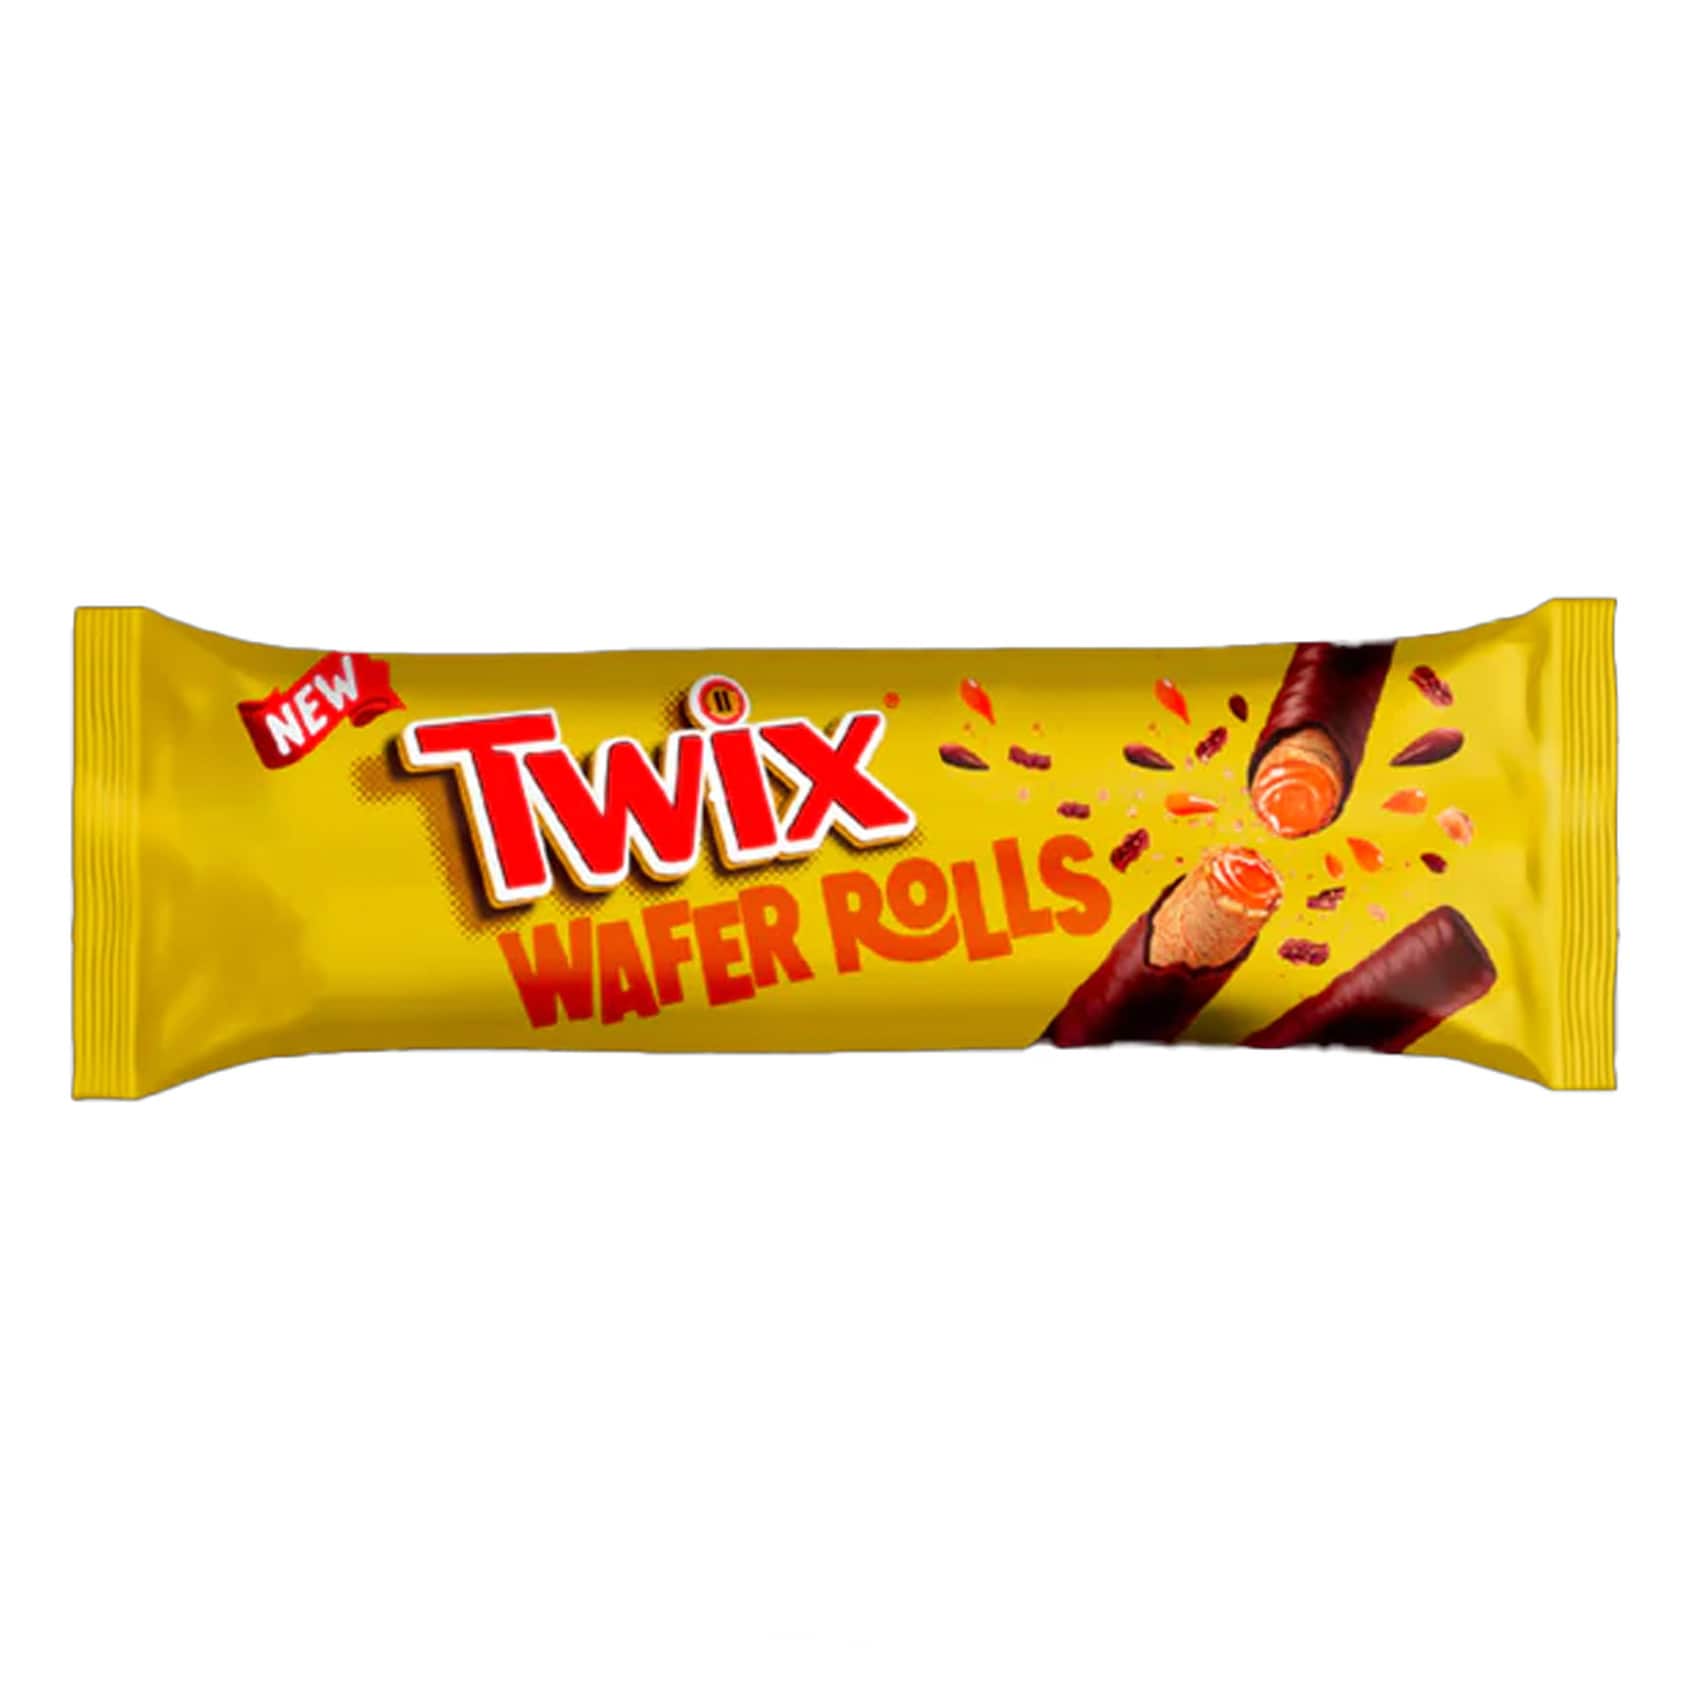 The Internet Is Shocked To Learn The Full Name Of The “Twix” Candy